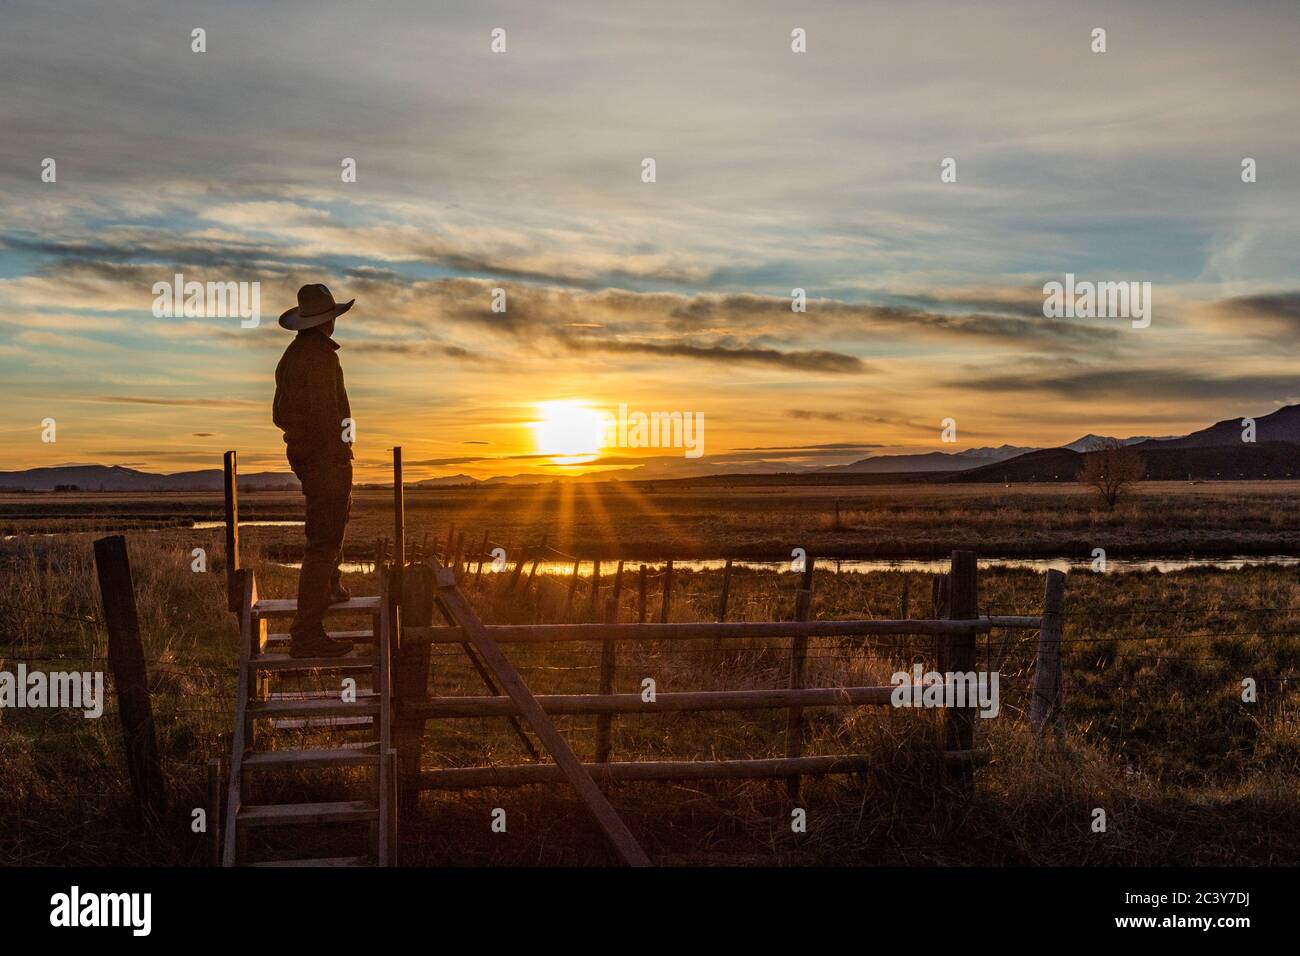 USA, Idaho, Bellevue, Cowboy standing on fence at sunset Stock Photo